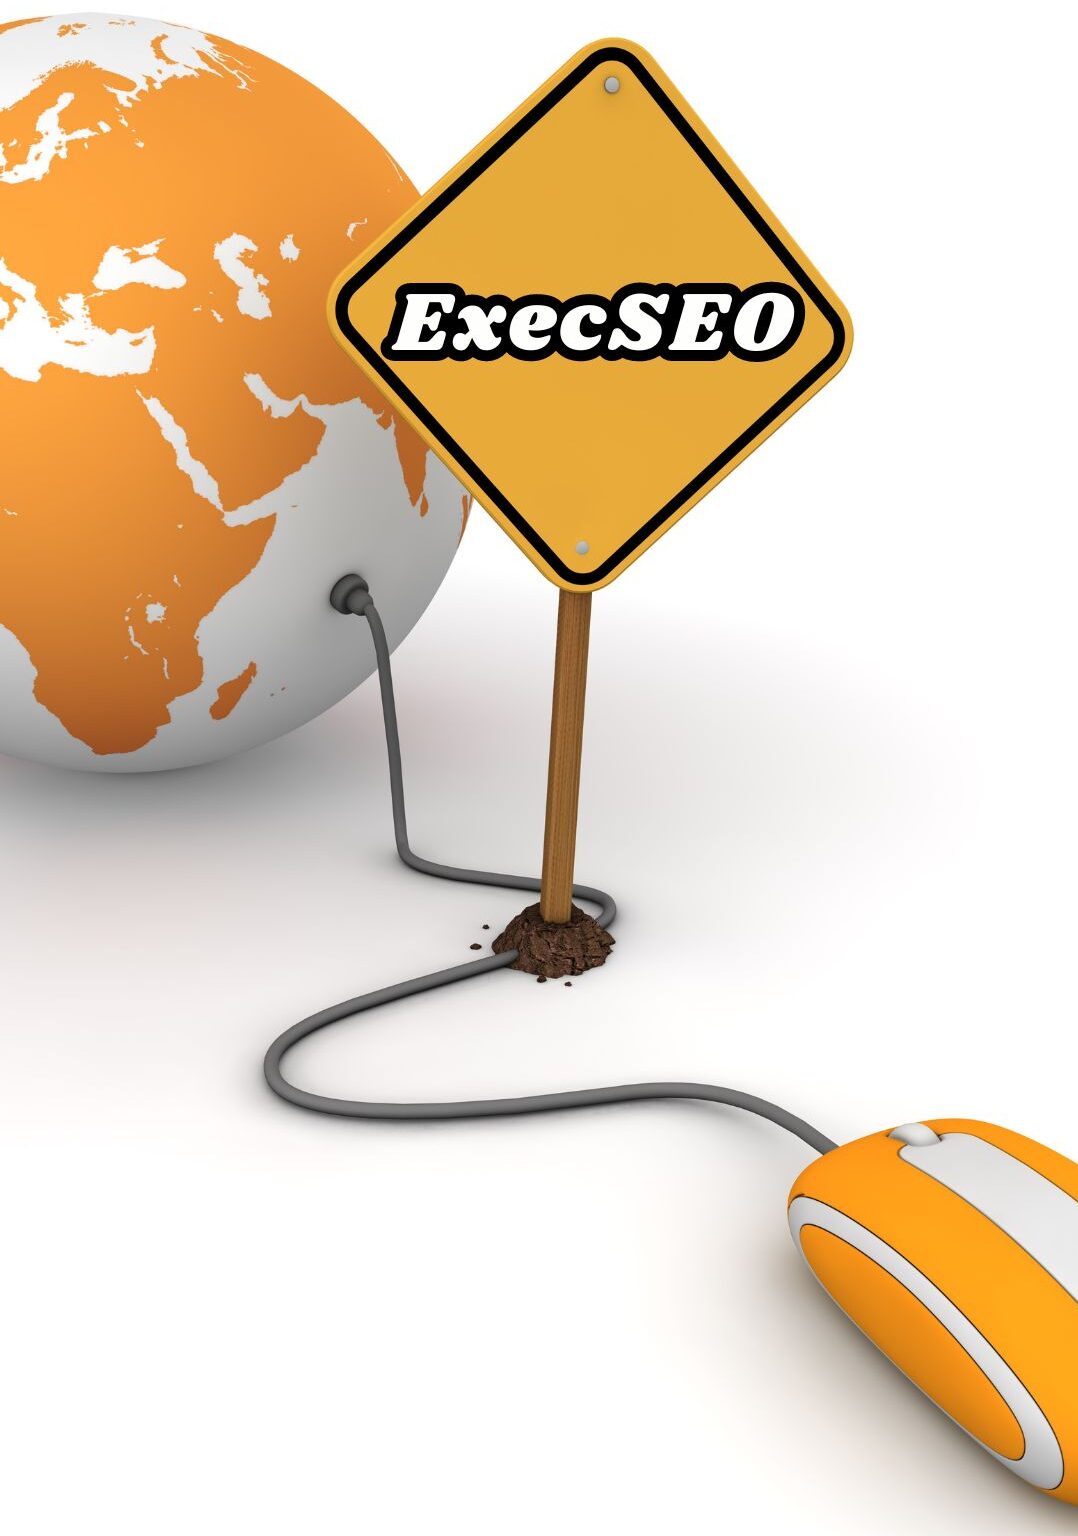 ExecSEO - SEO and Digital Assistance Company. Your online business to the world. Serving online businesses worldwide from Kenya.